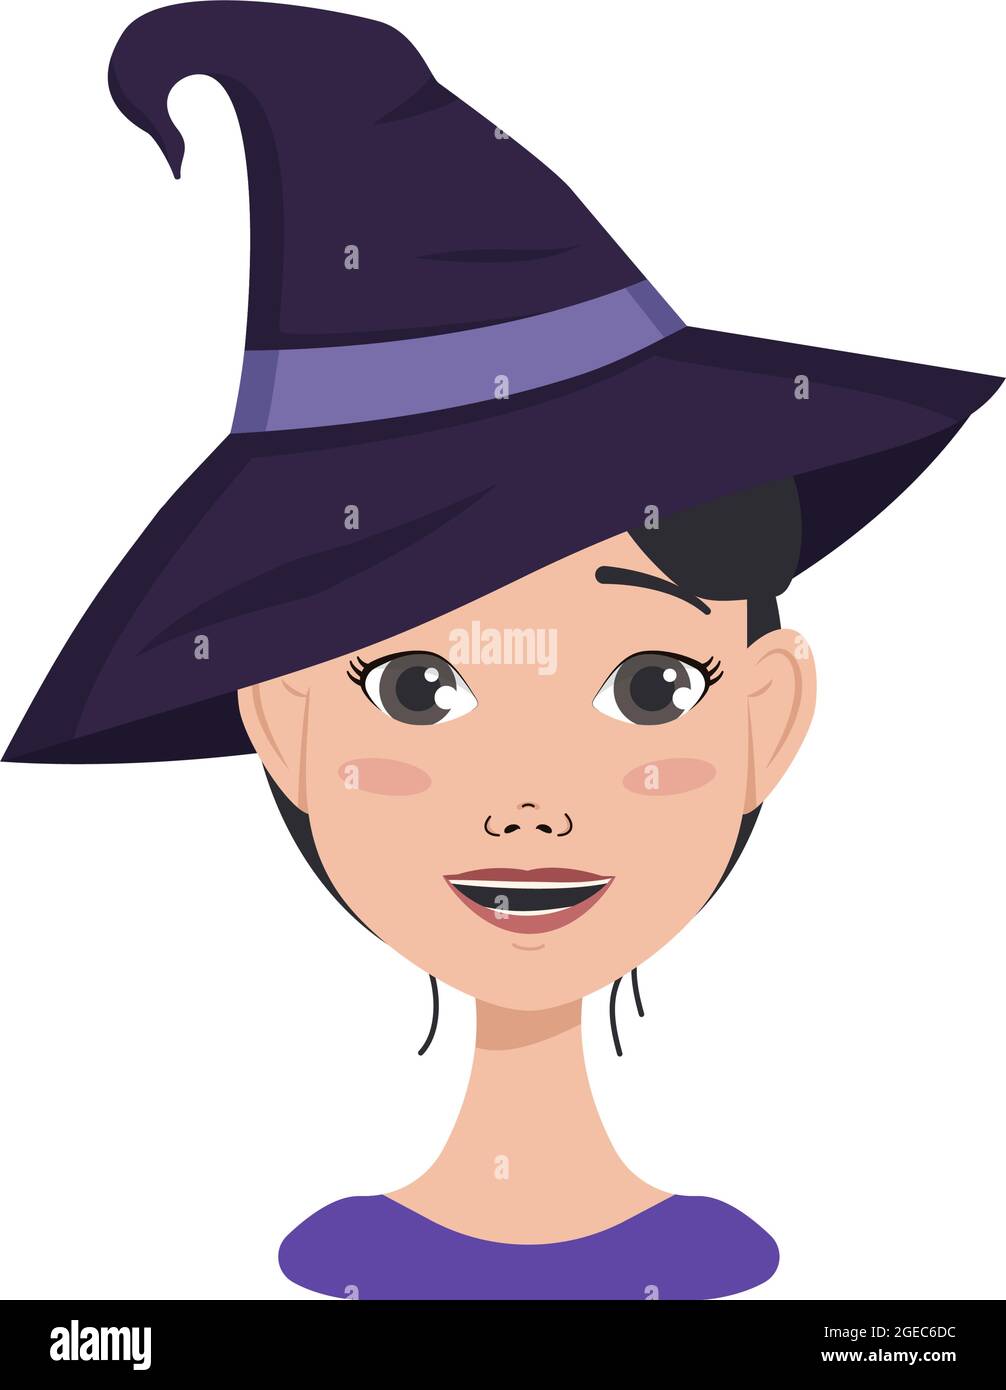 Avatar of asian woman with dark hair with emotions of joy and happiness, smile face and wearing a witch hat. Halloween character in costume Stock Vector